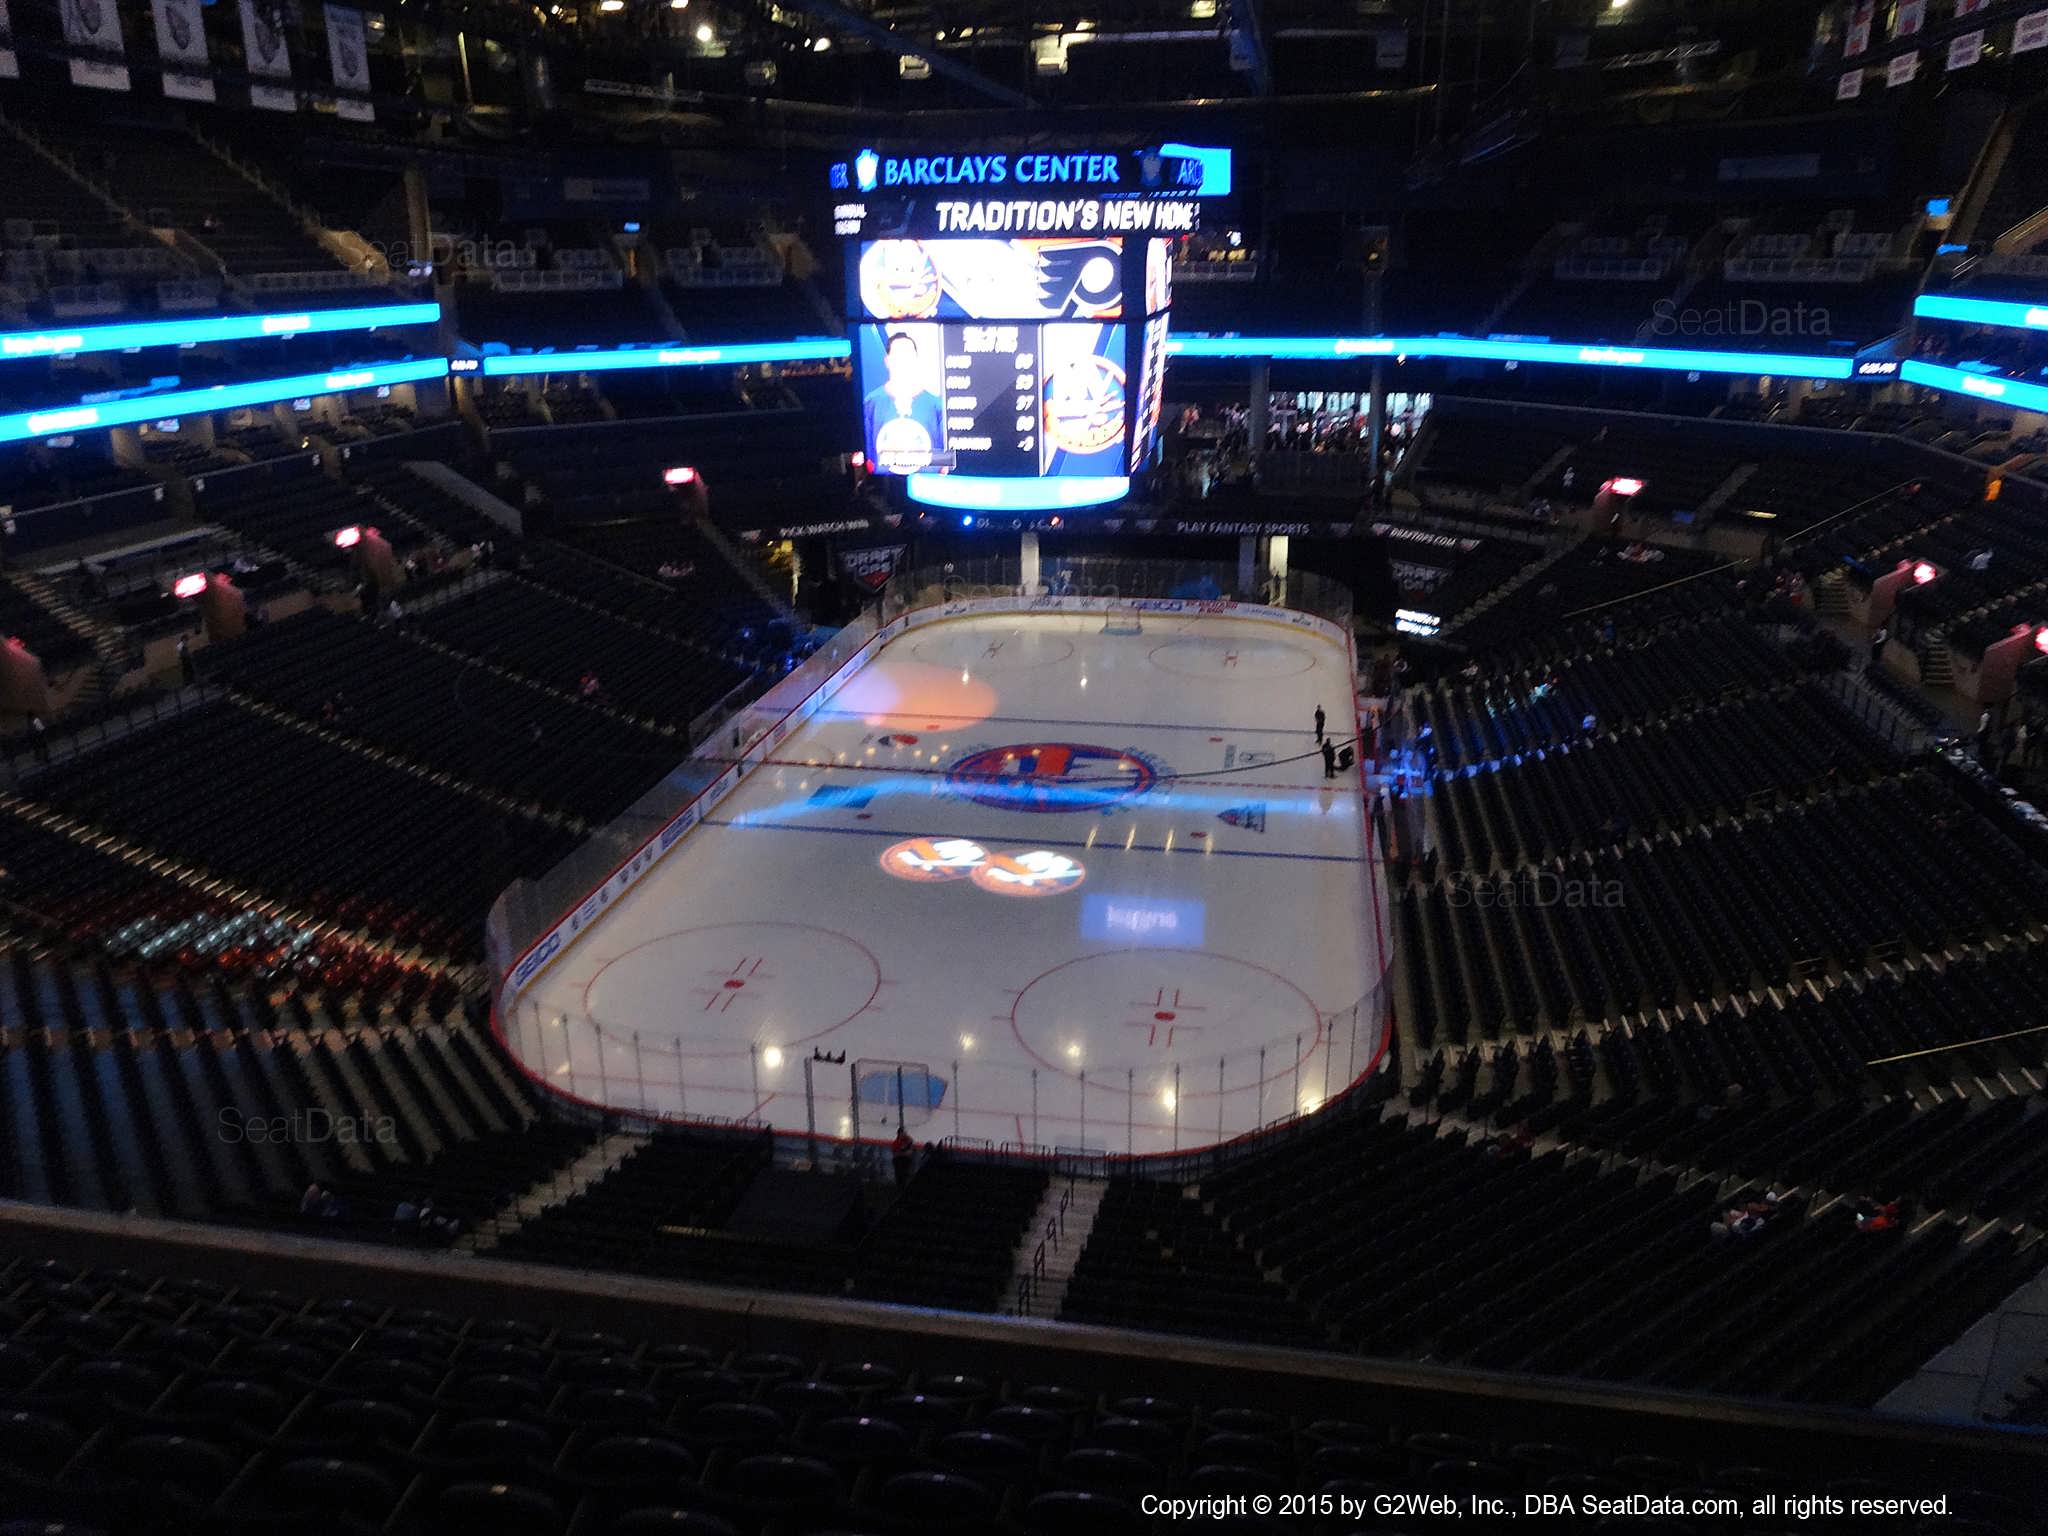 Seat View from Section 215 at the Barclays Center, home of the New York Islanders